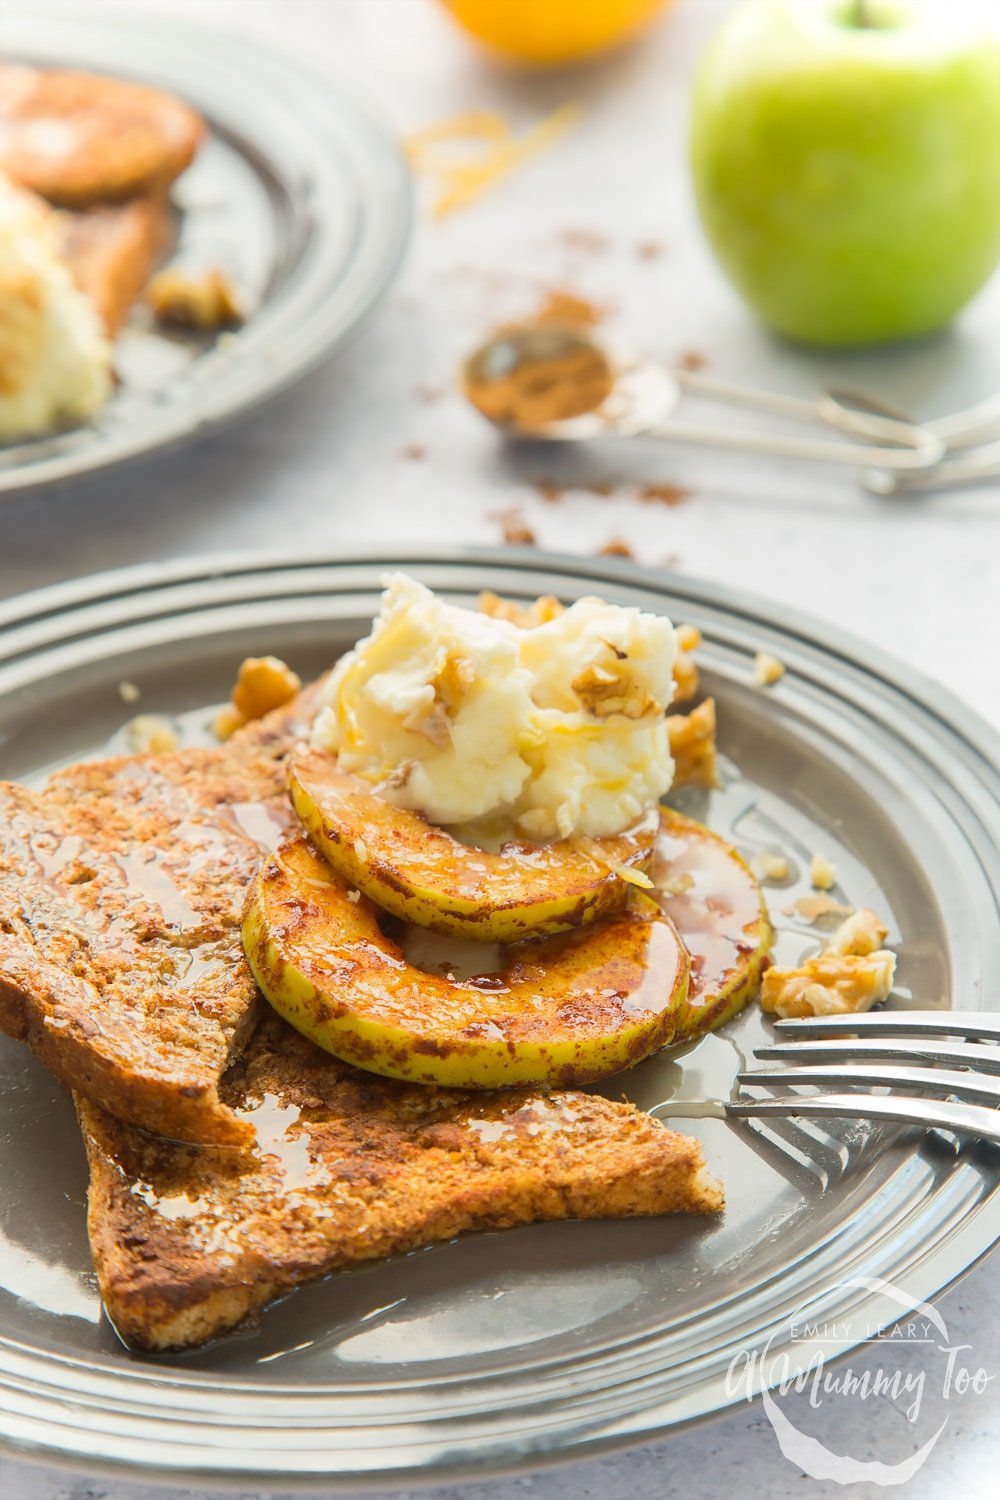 Cinnamon French toast with griddled apple slices and lemon mascarpone - a delicious breakfast!